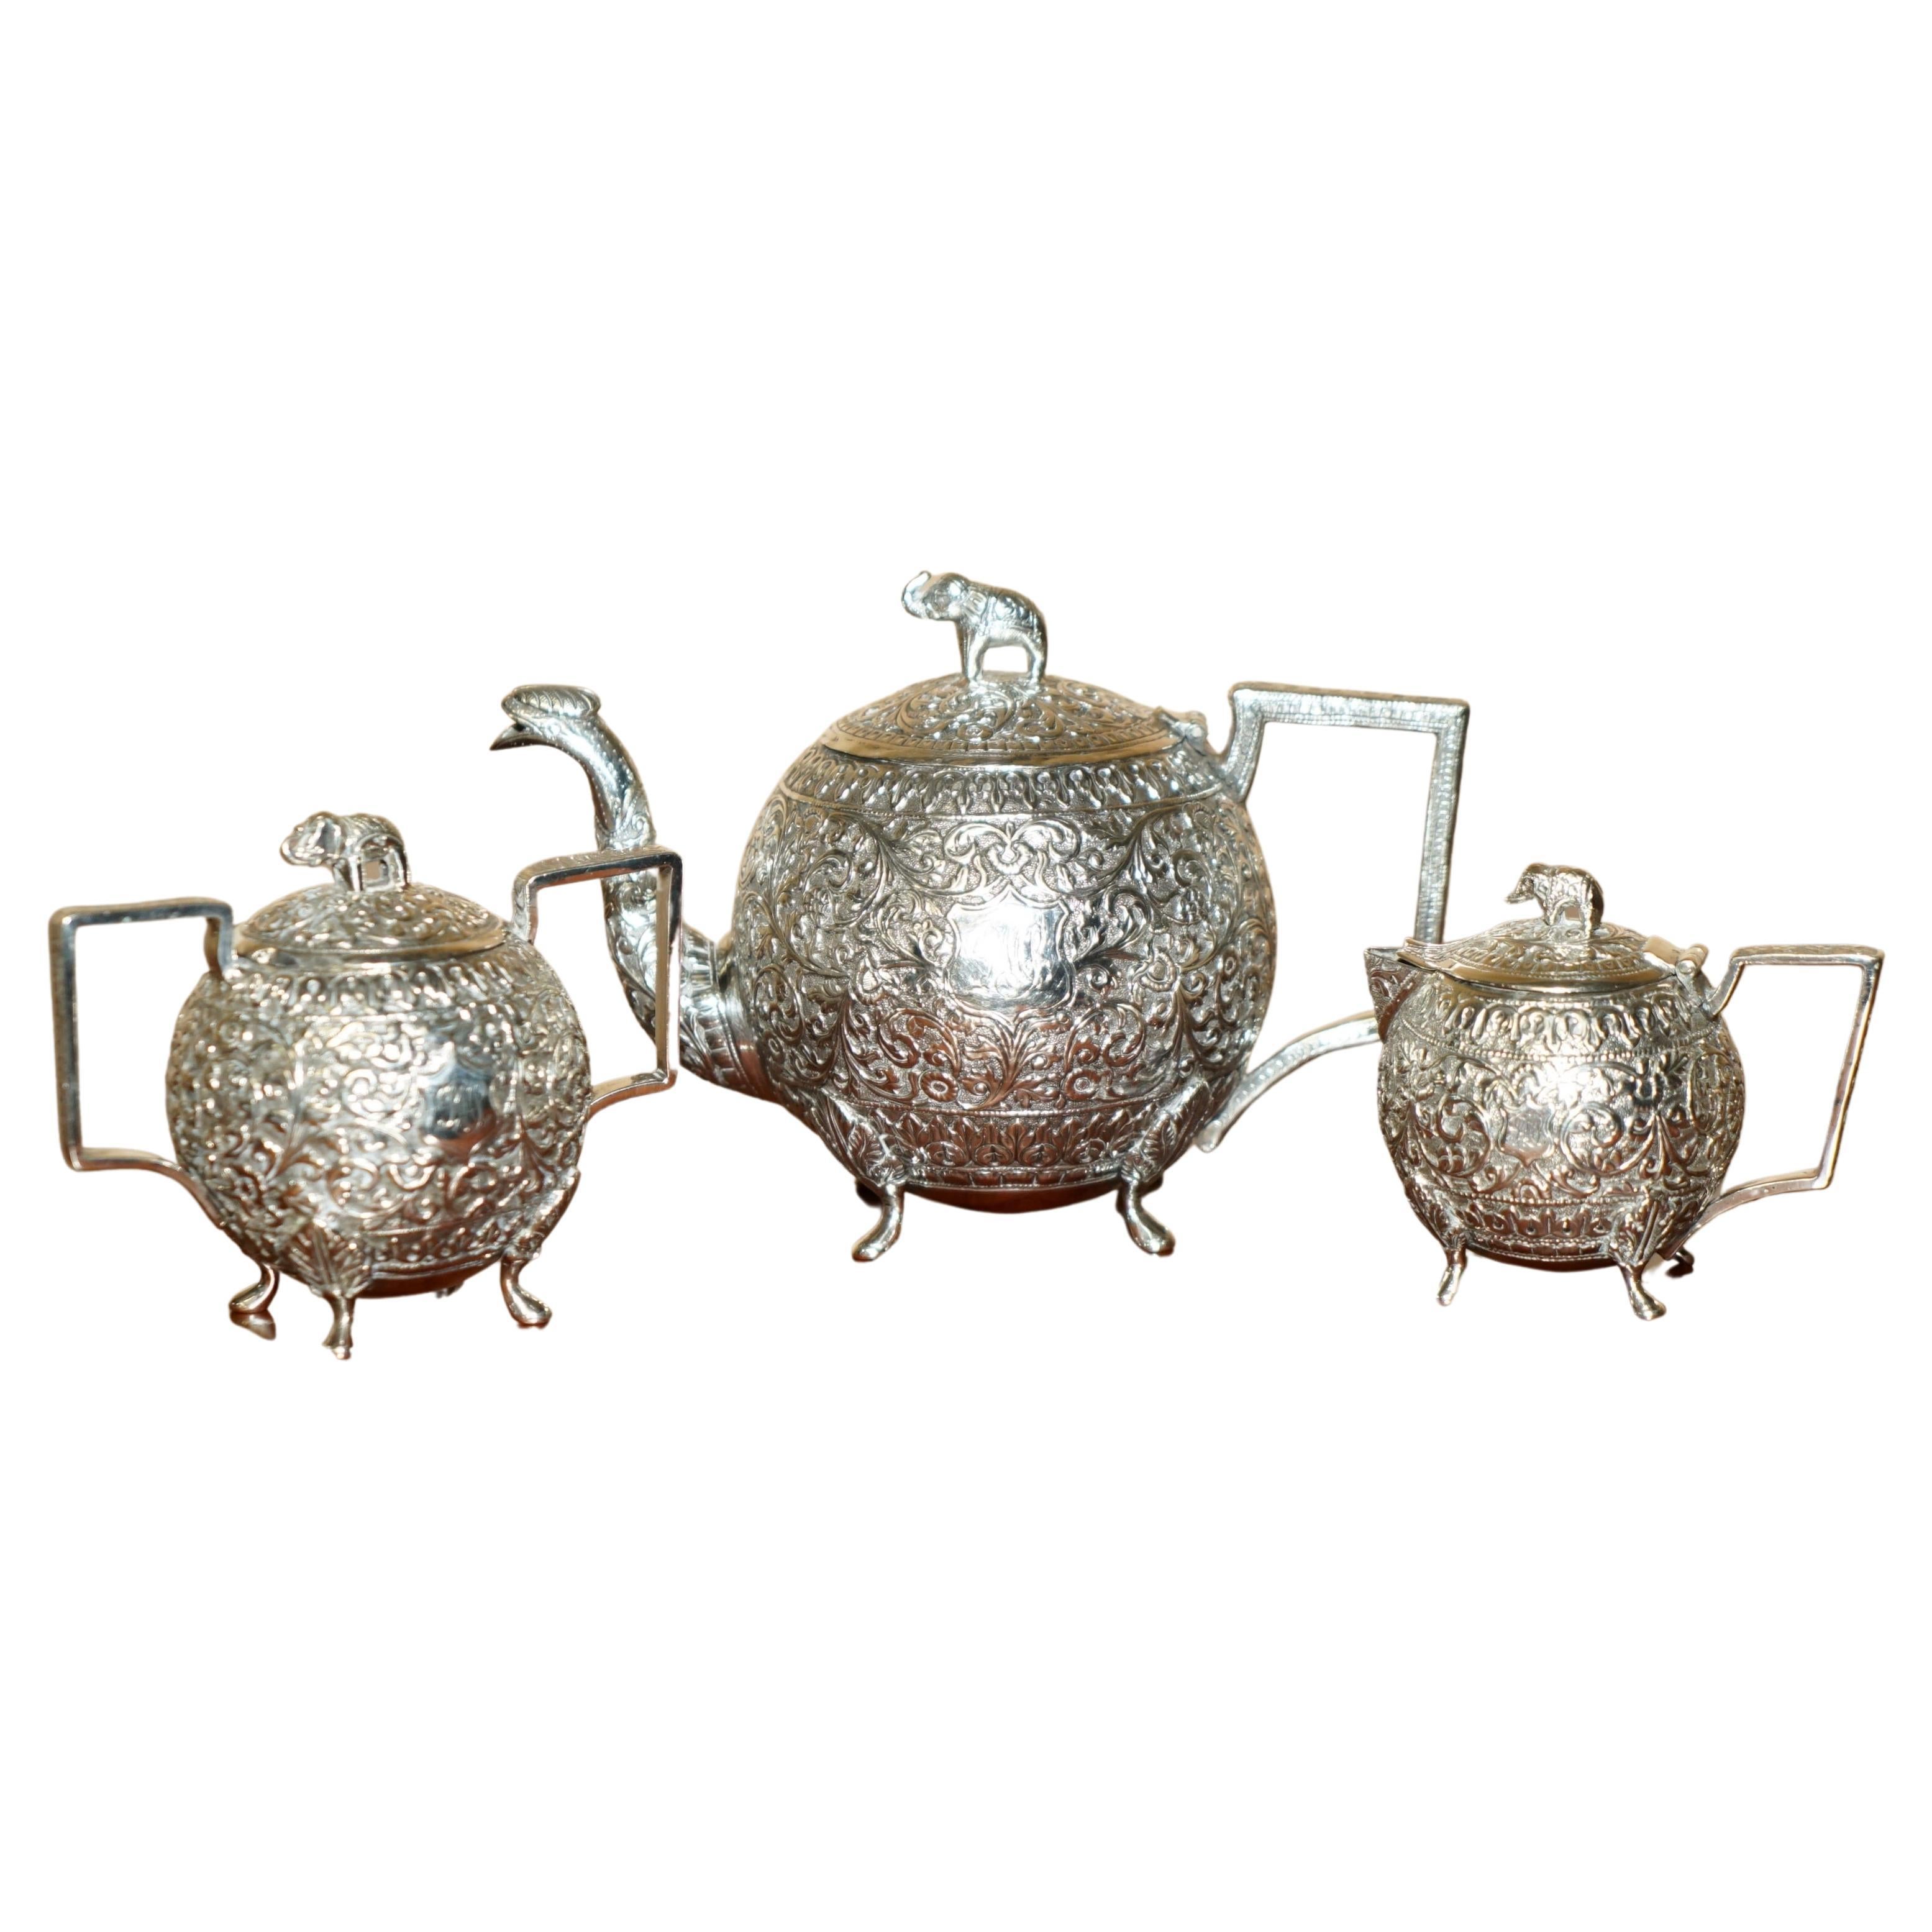 ANTIQUE INDIAN ELEPHANT COLONIAL SOLiD SILVER TEA SERVICE OOMERSI MAWJI & SONS For Sale